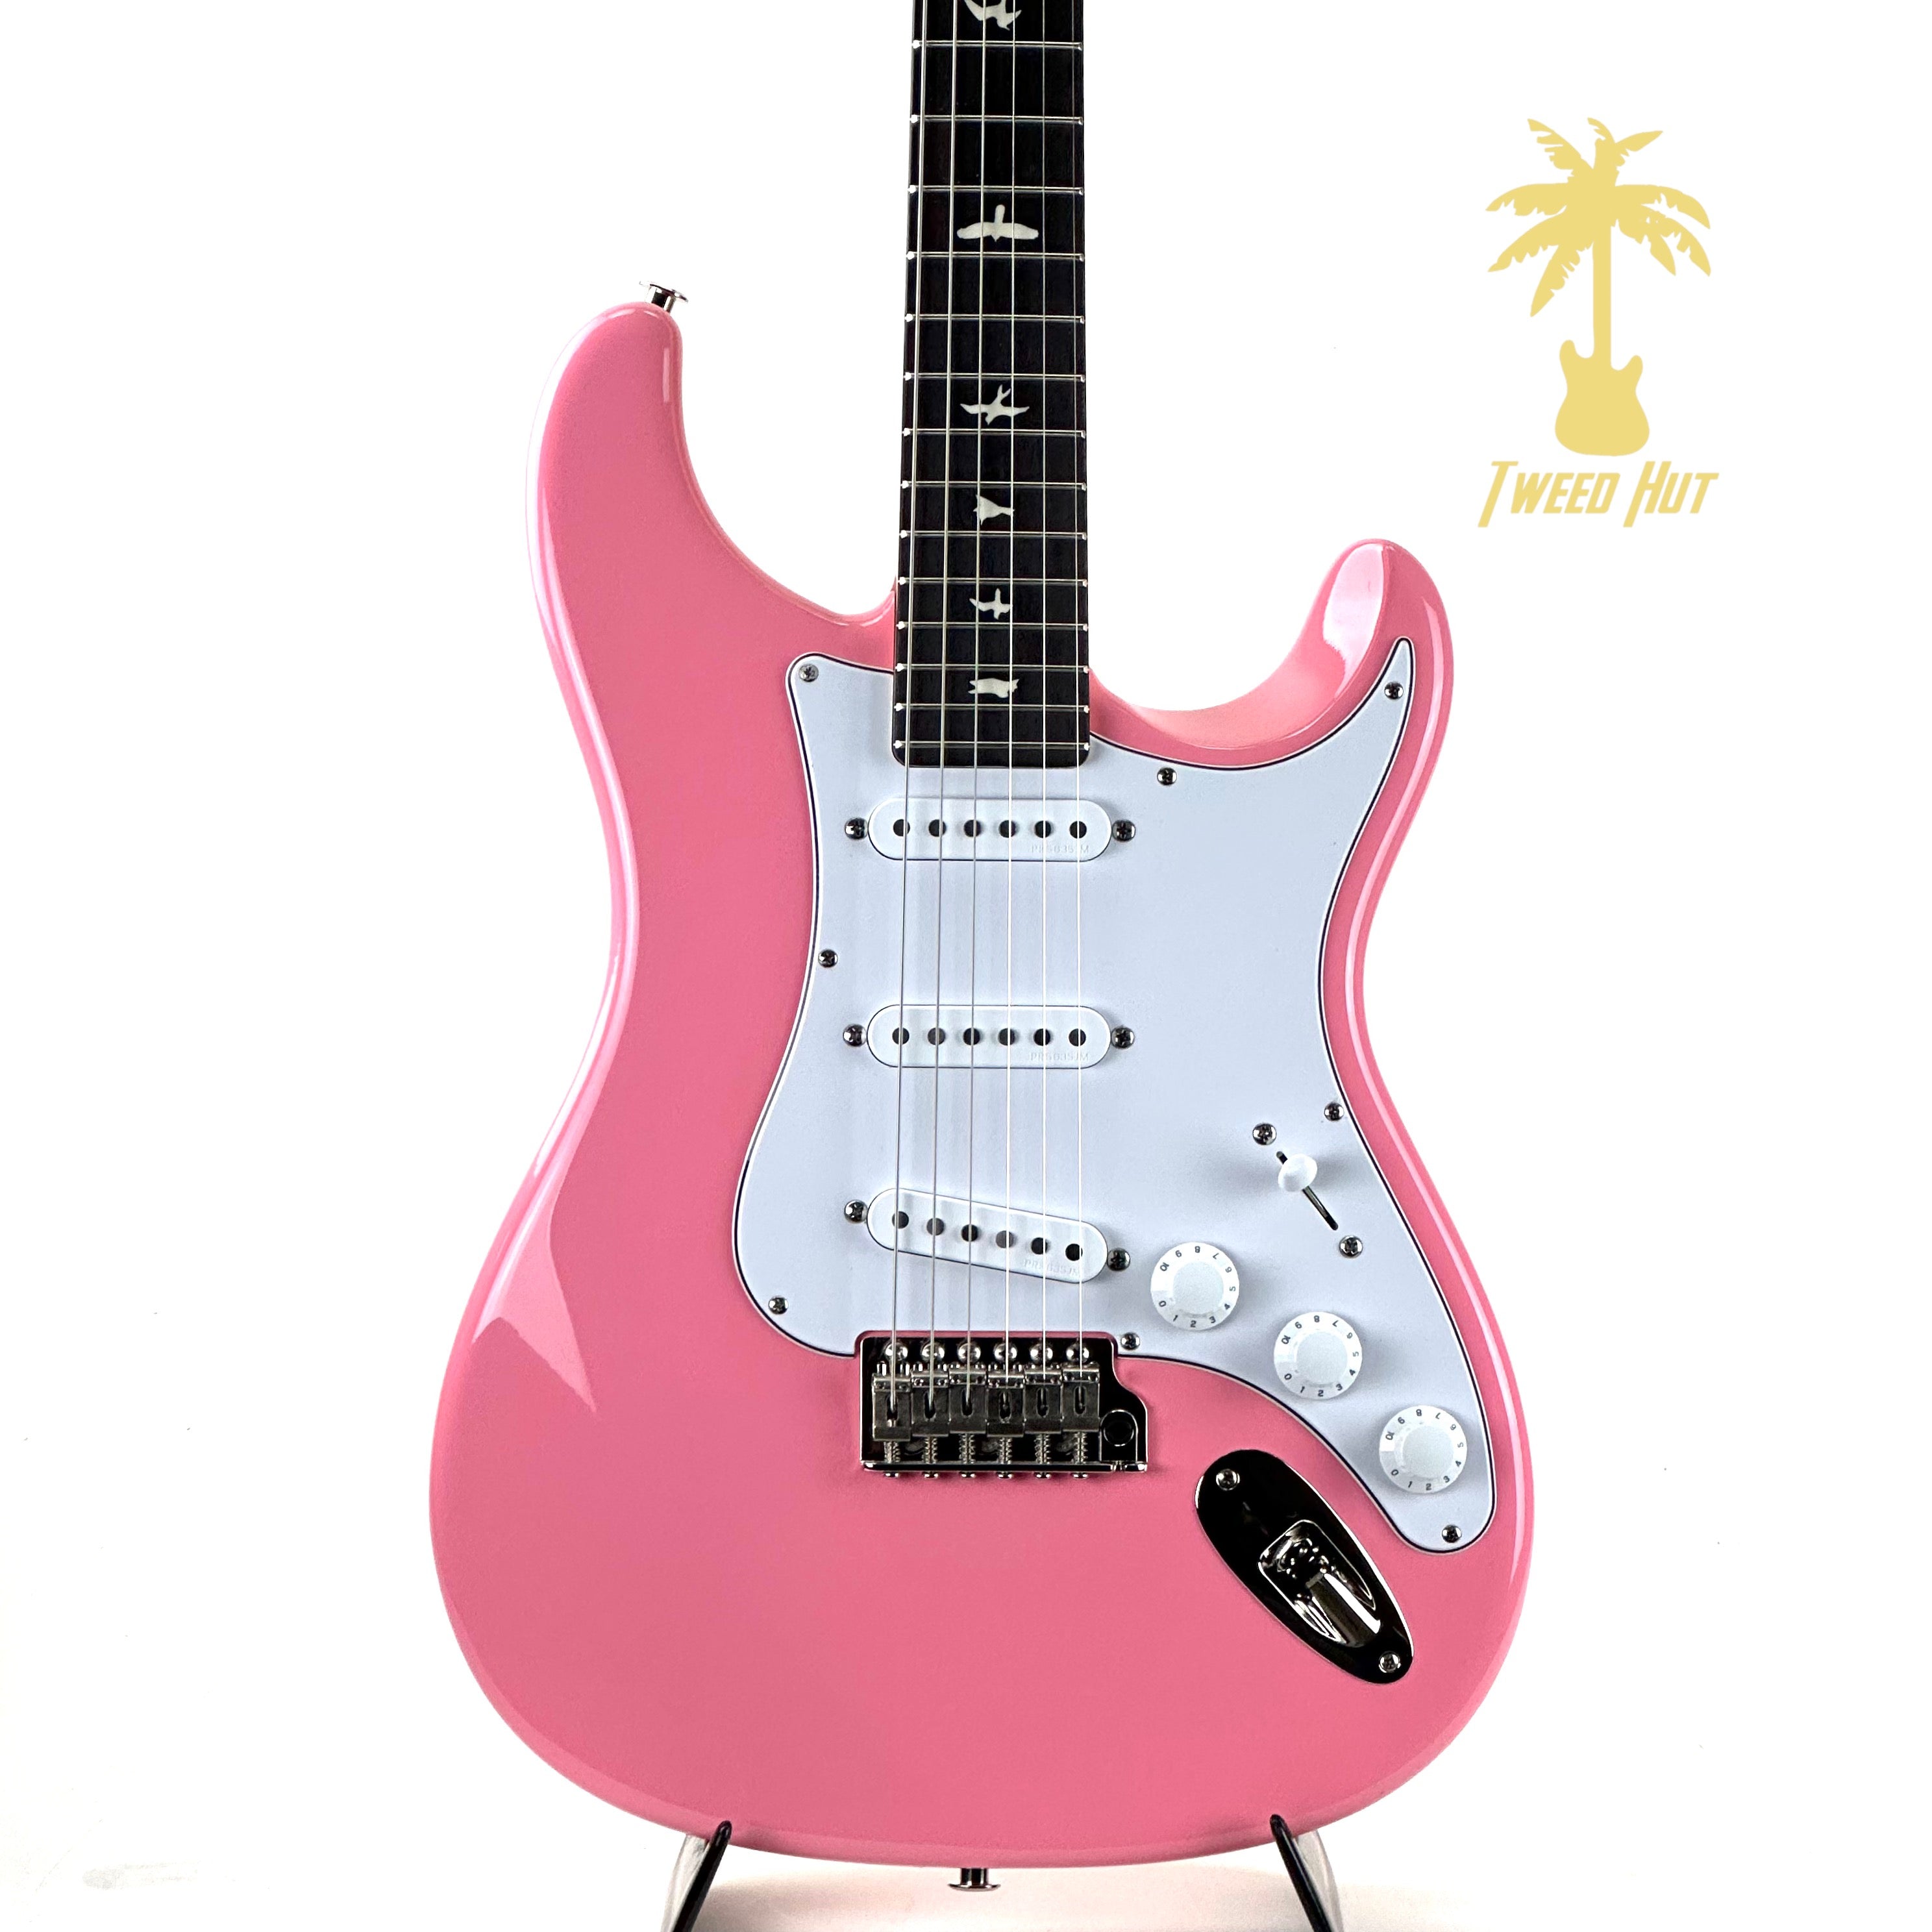 PRS SILVER SKY JOHN MAYER SIGNATURE WITH ROSEWOOD FRETBOARD ROXY PINK